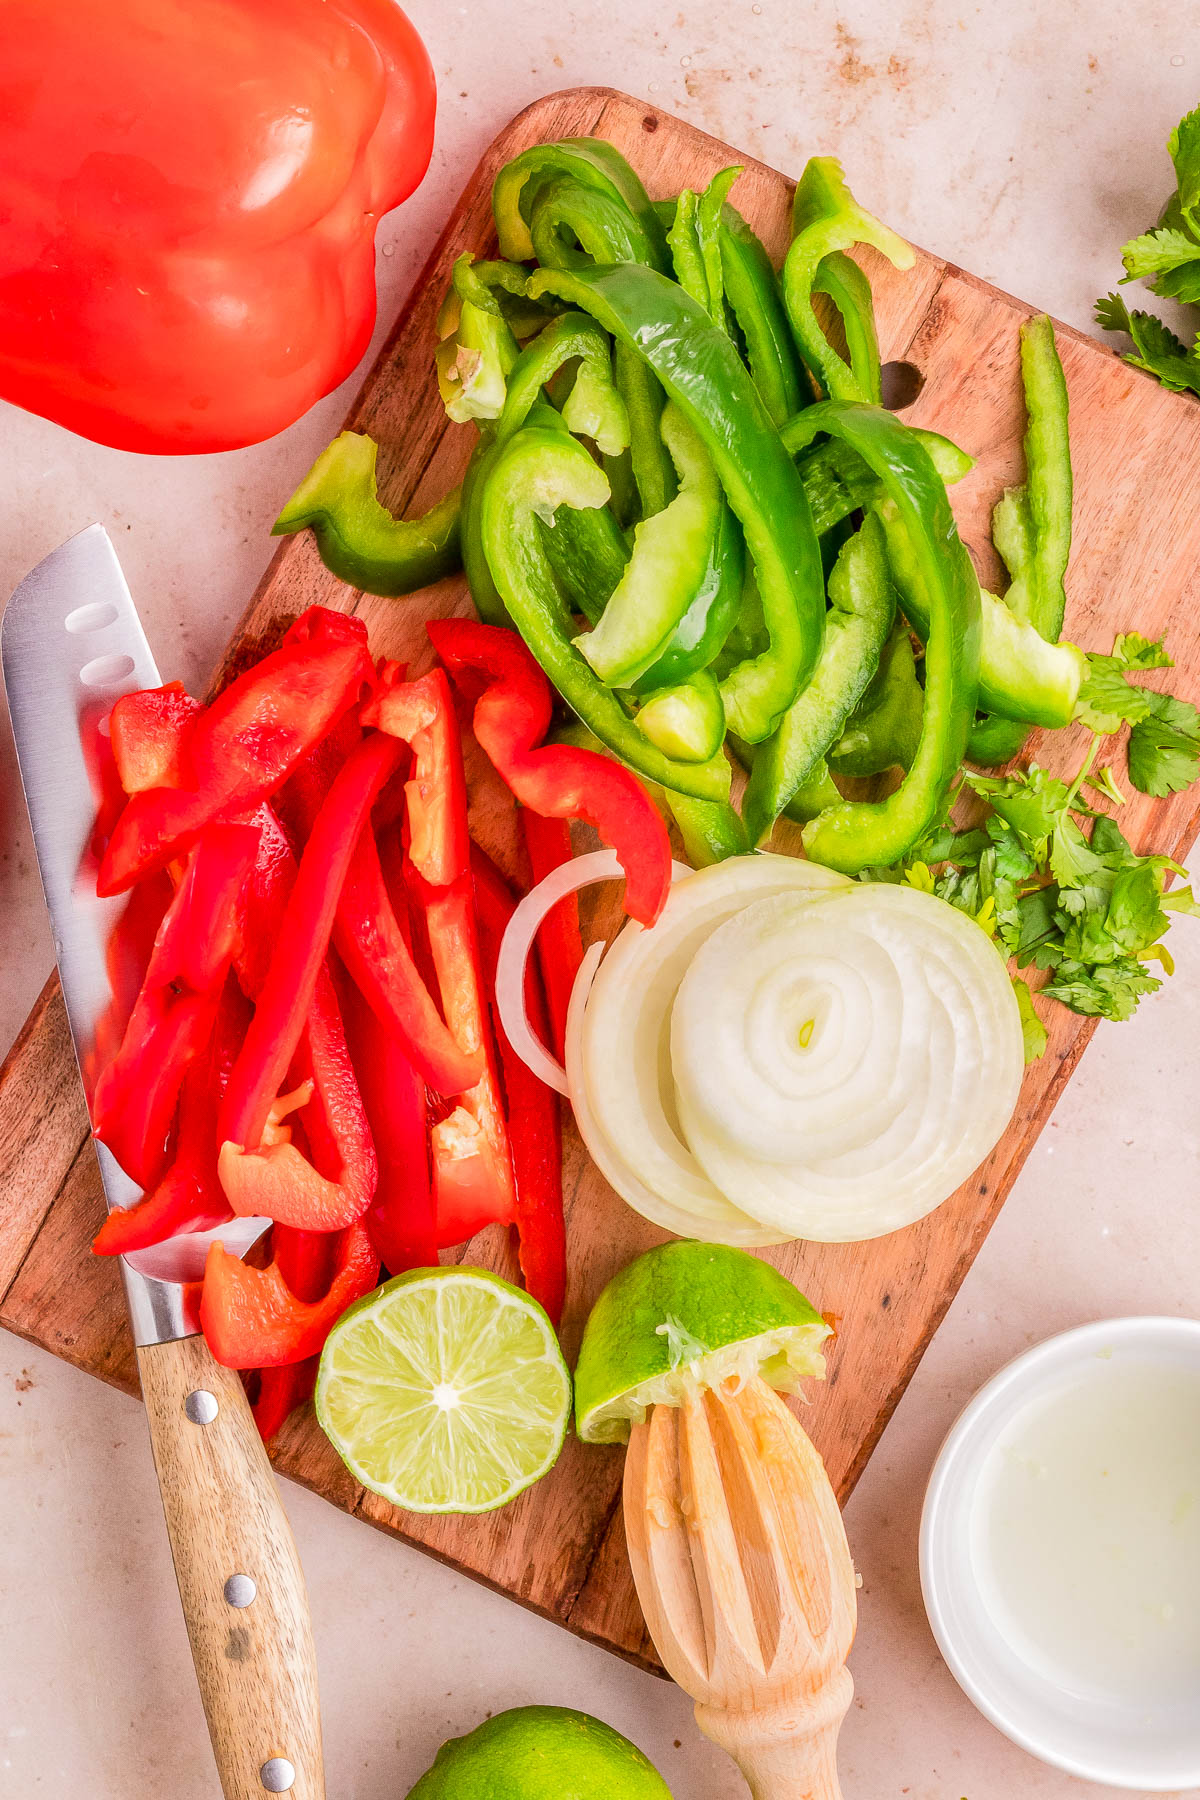 Chopped red and green bell peppers, onion, and lime on a cutting board with a knife, surrounded by whole vegetables and a wooden juicer.